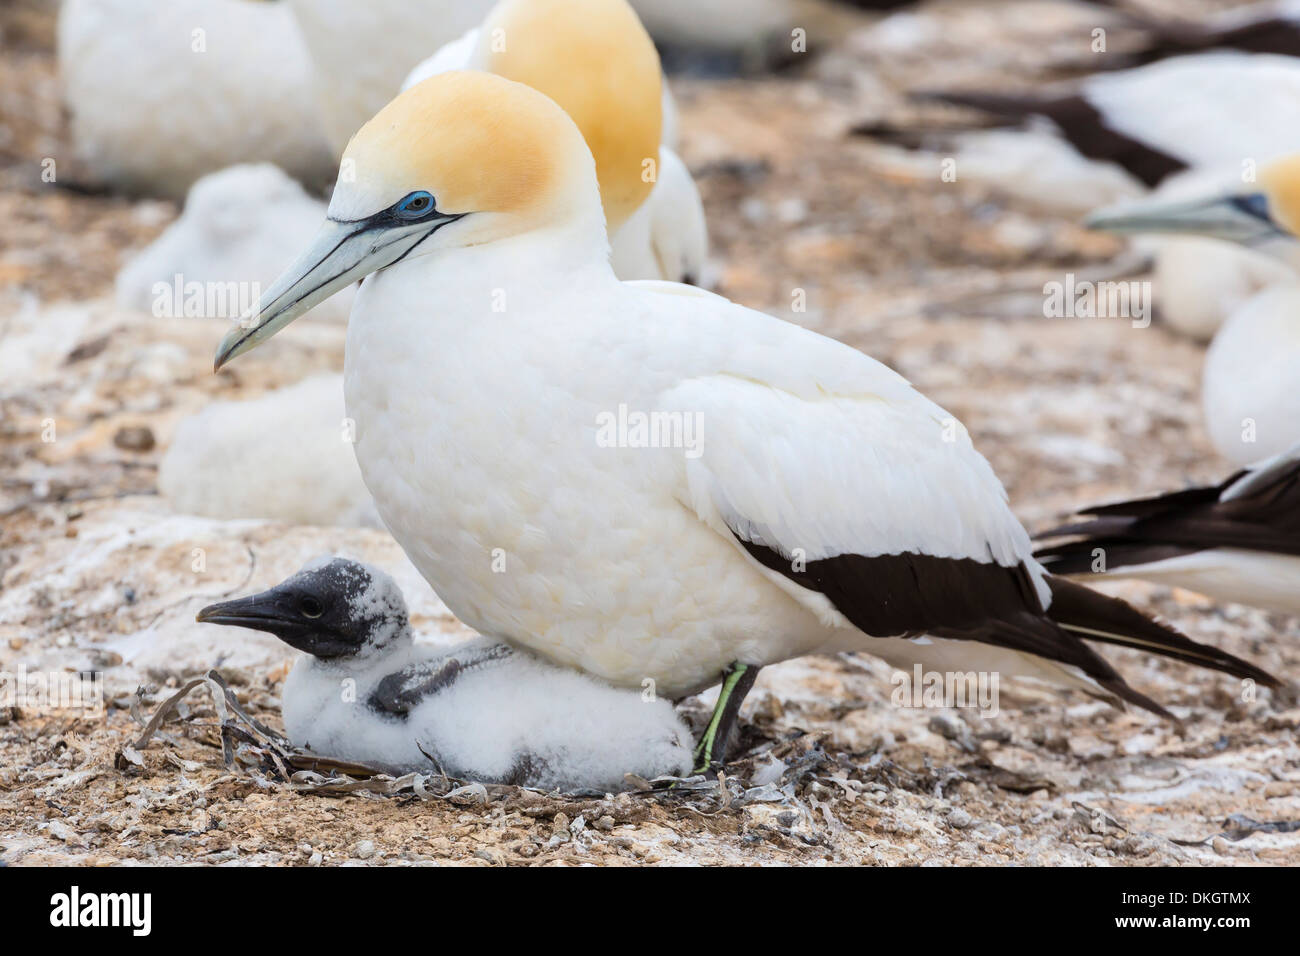 Australasian gannet (Morus serrator) with chick at Cape Kidnappers, North Island, New Zealand, Pacific Stock Photo